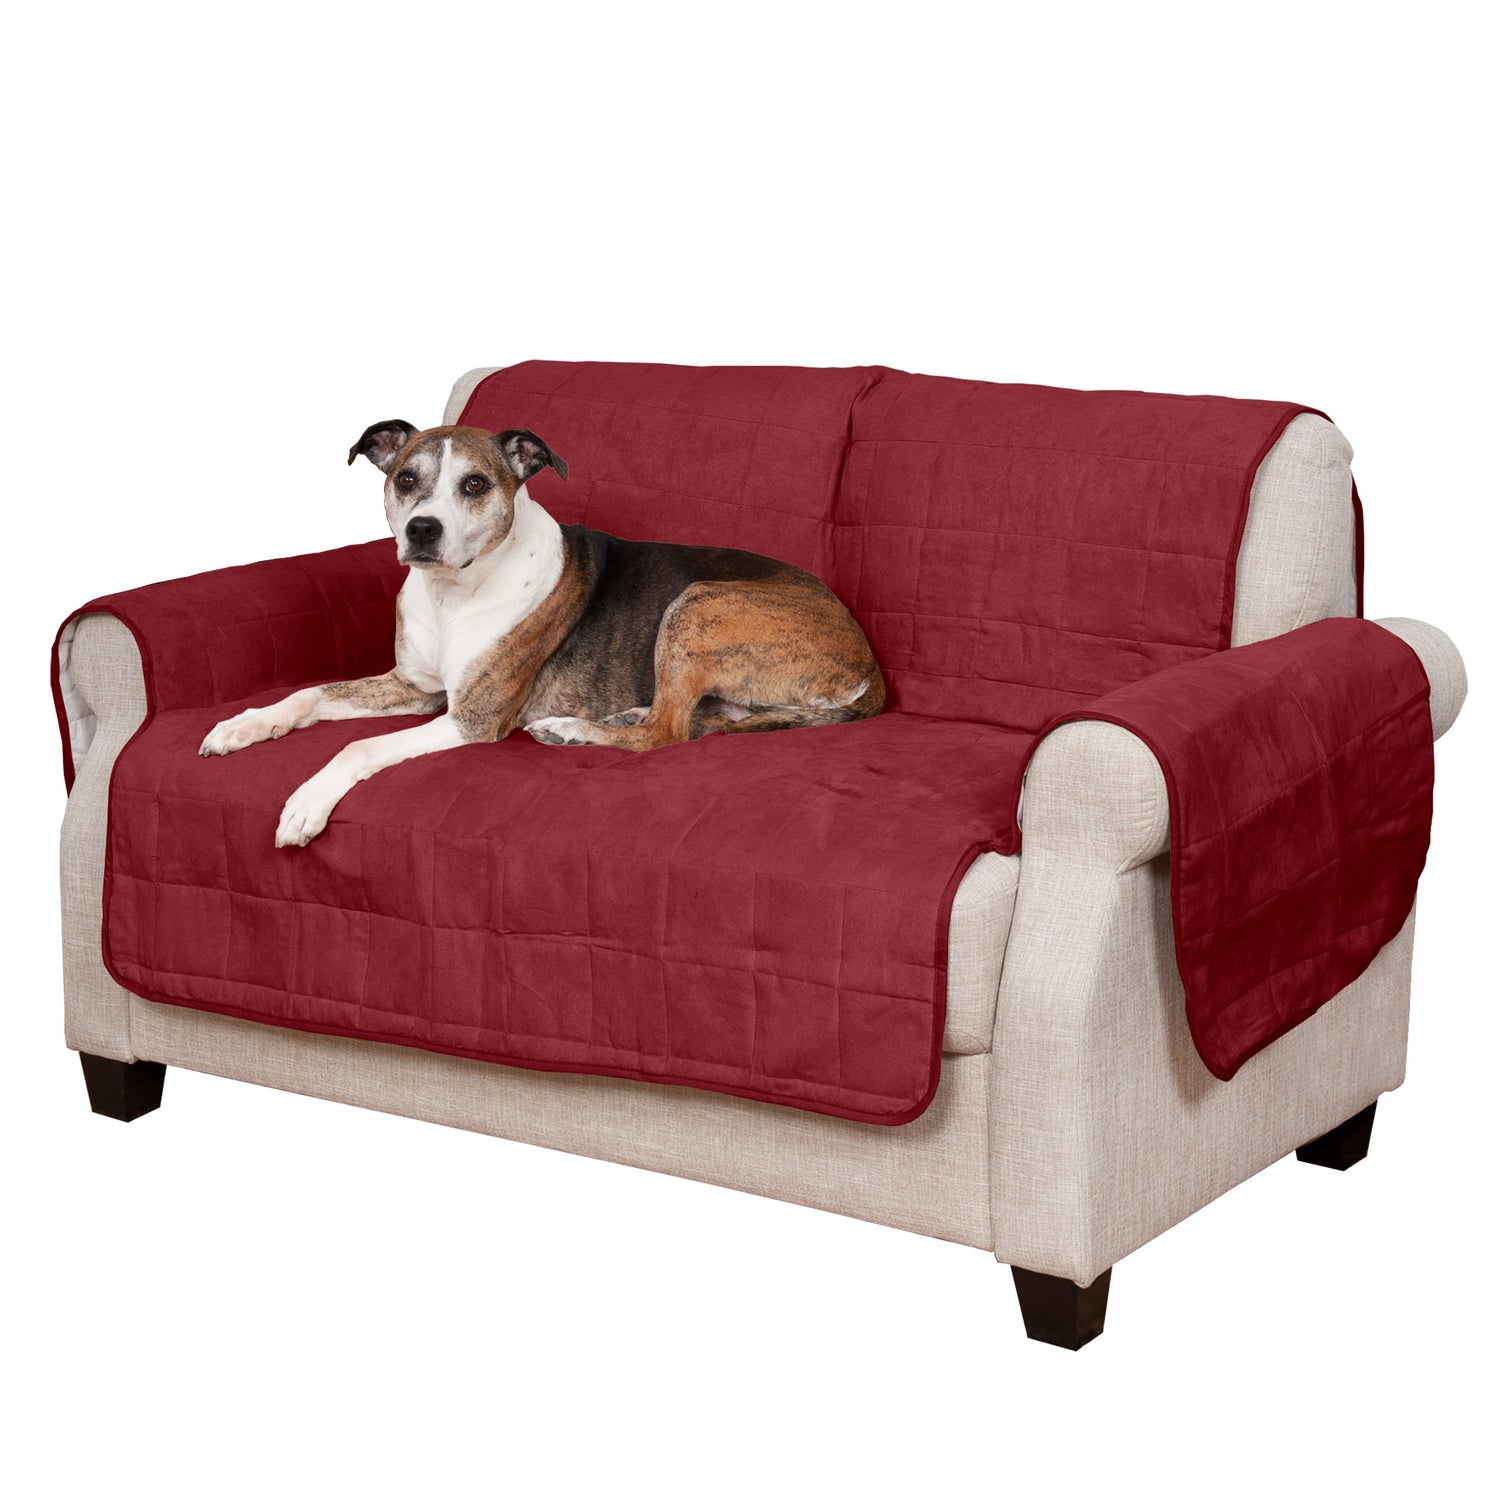 Furhaven Pet Furniture Cover | Suede Furniture Cover Protector for Dogs & Cats, Clay, Loveseat Animals & Pet Supplies > Pet Supplies > Cat Supplies > Cat Furniture FurHaven Pet Products Loveseat Burgundy 